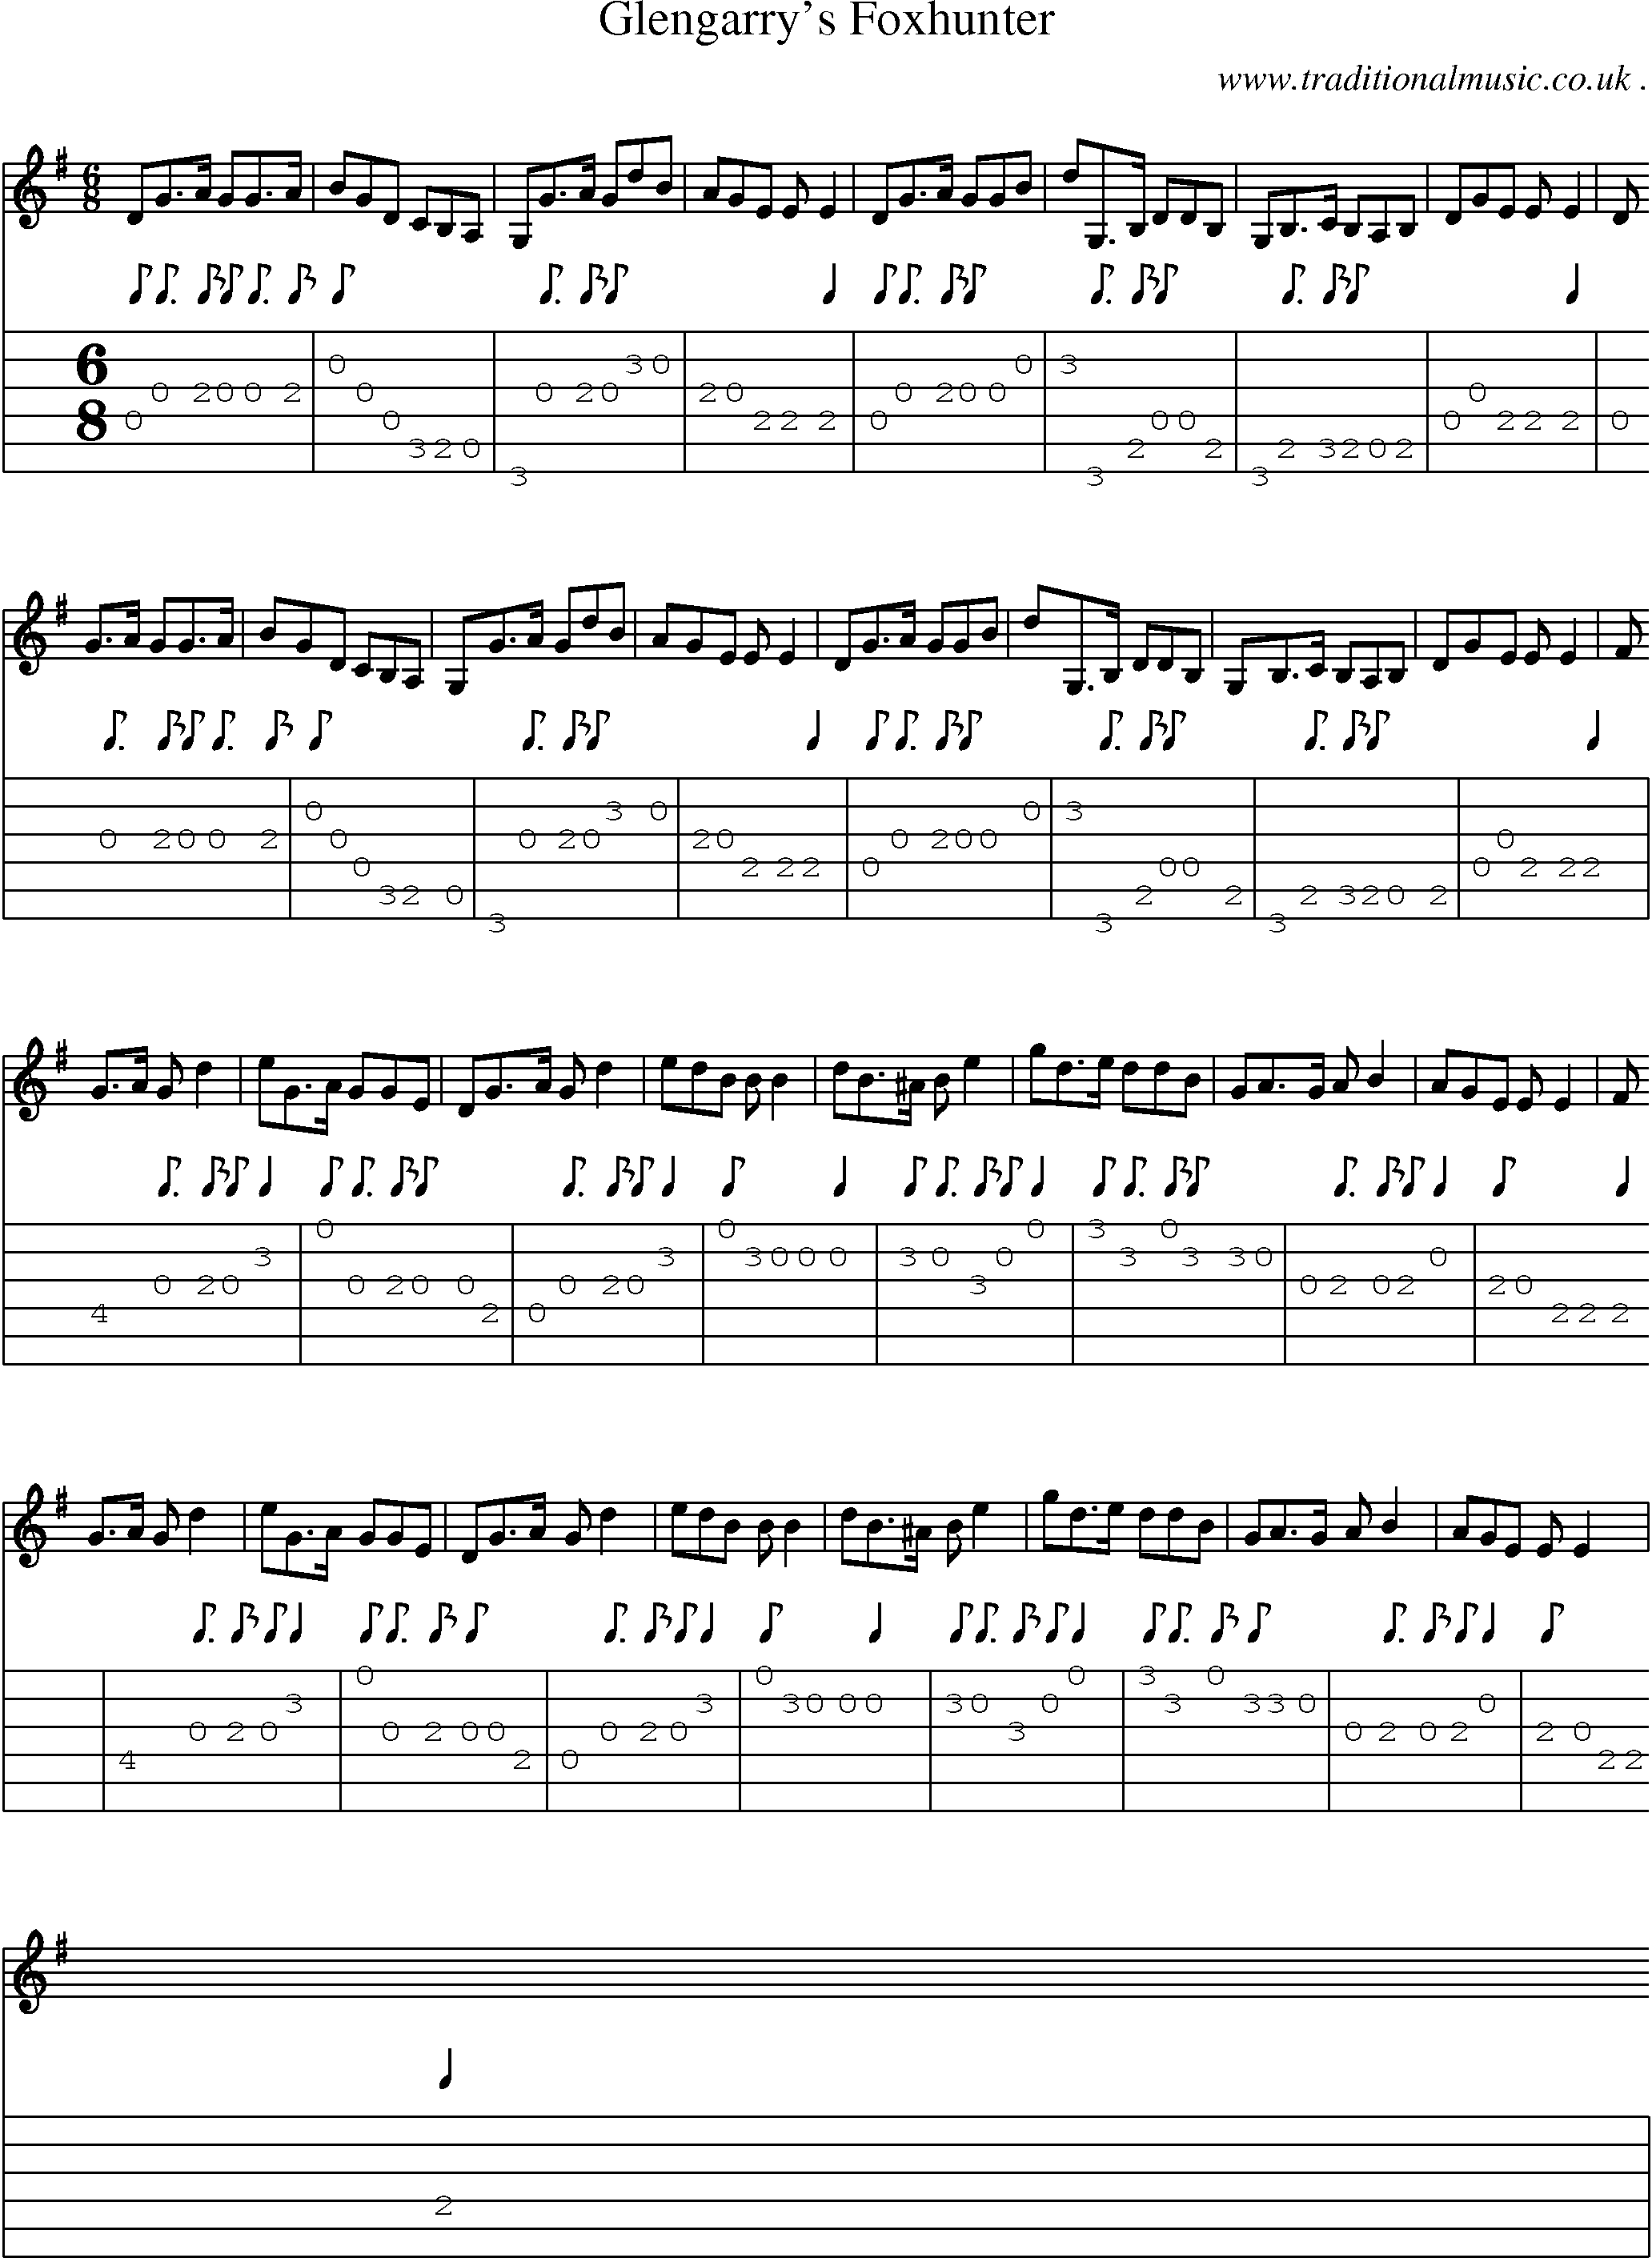 Sheet-music  score, Chords and Guitar Tabs for Glengarrys Foxhunter